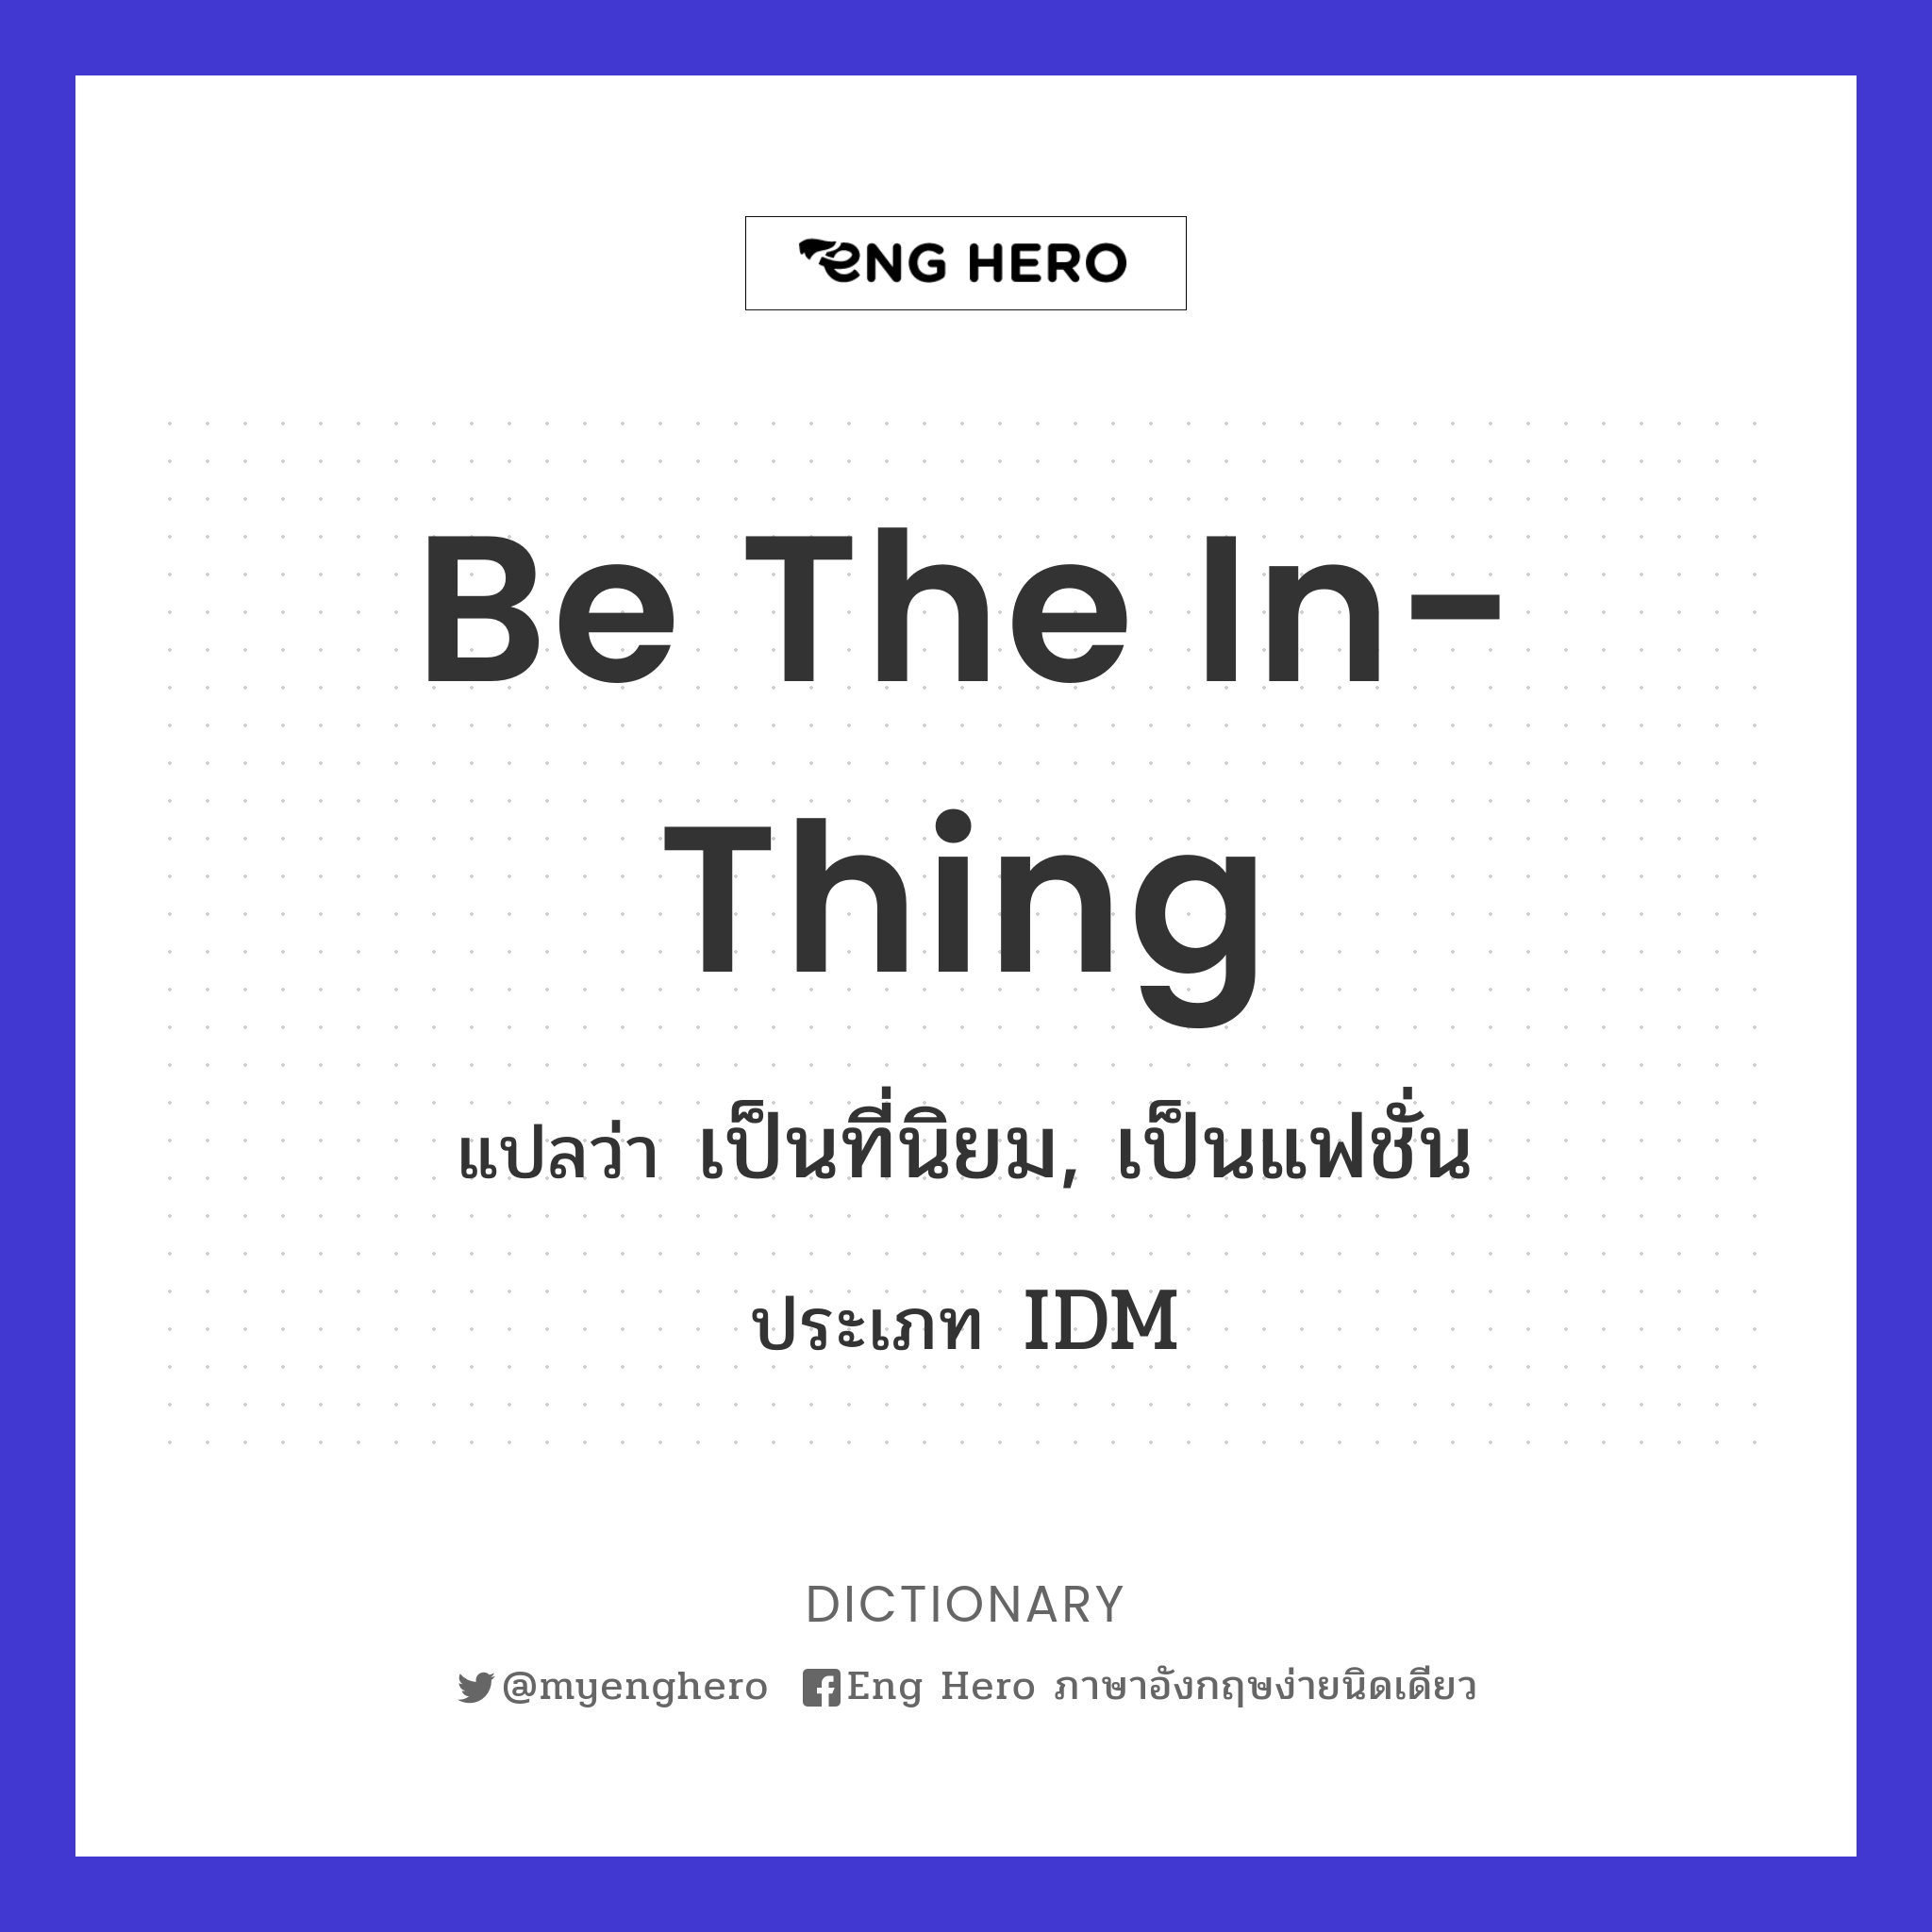 be the in-thing